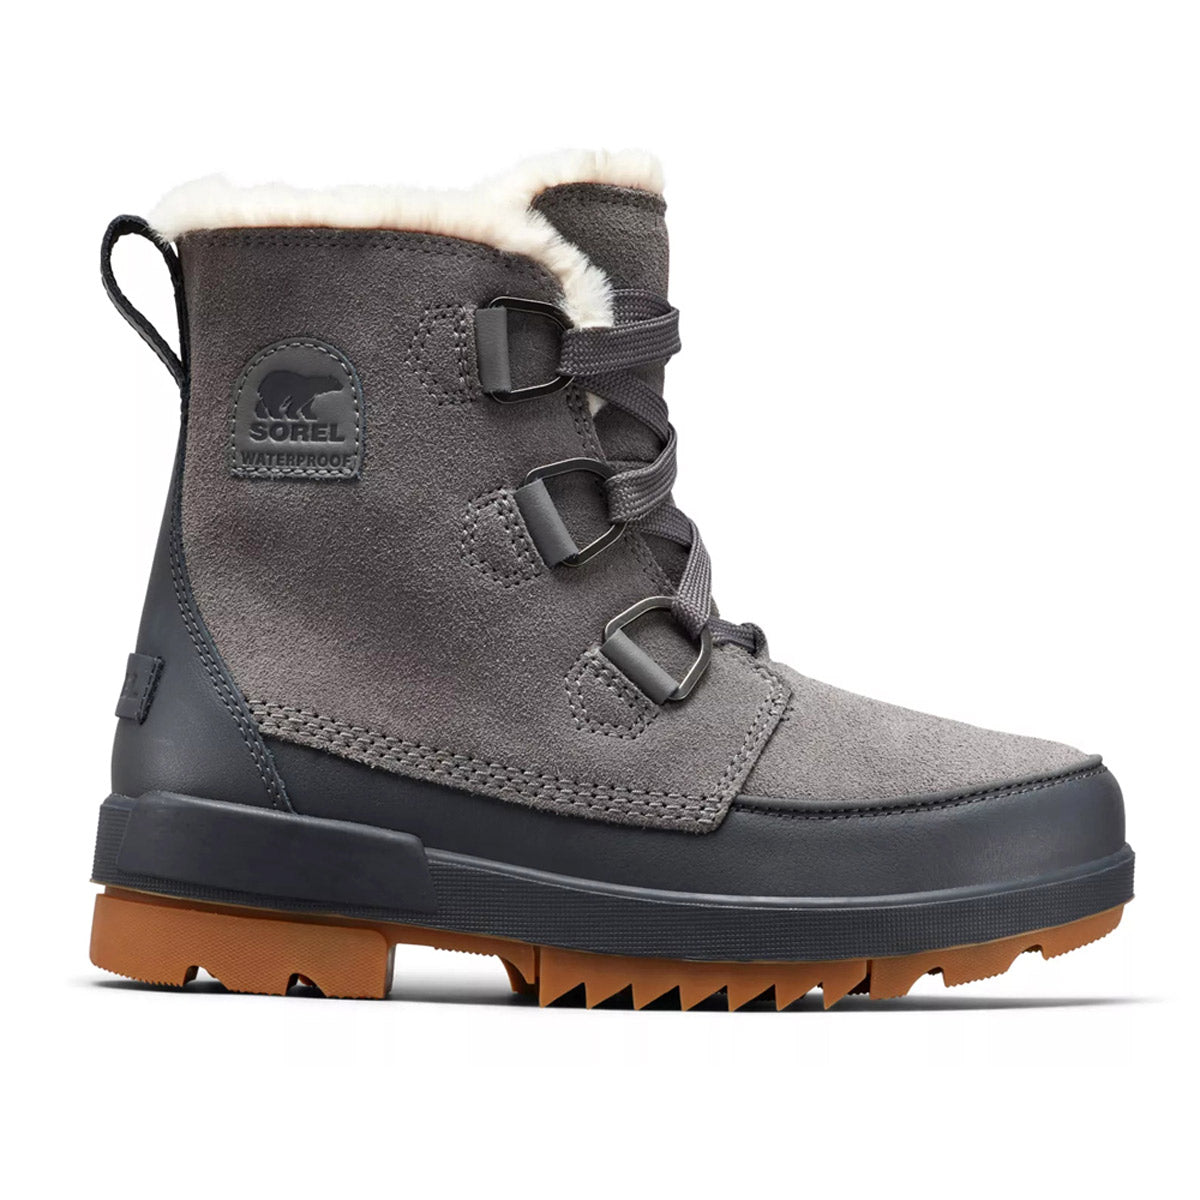 A gray Sorel Tivoli IV Quarry winter boot with fur lining and buckle details.